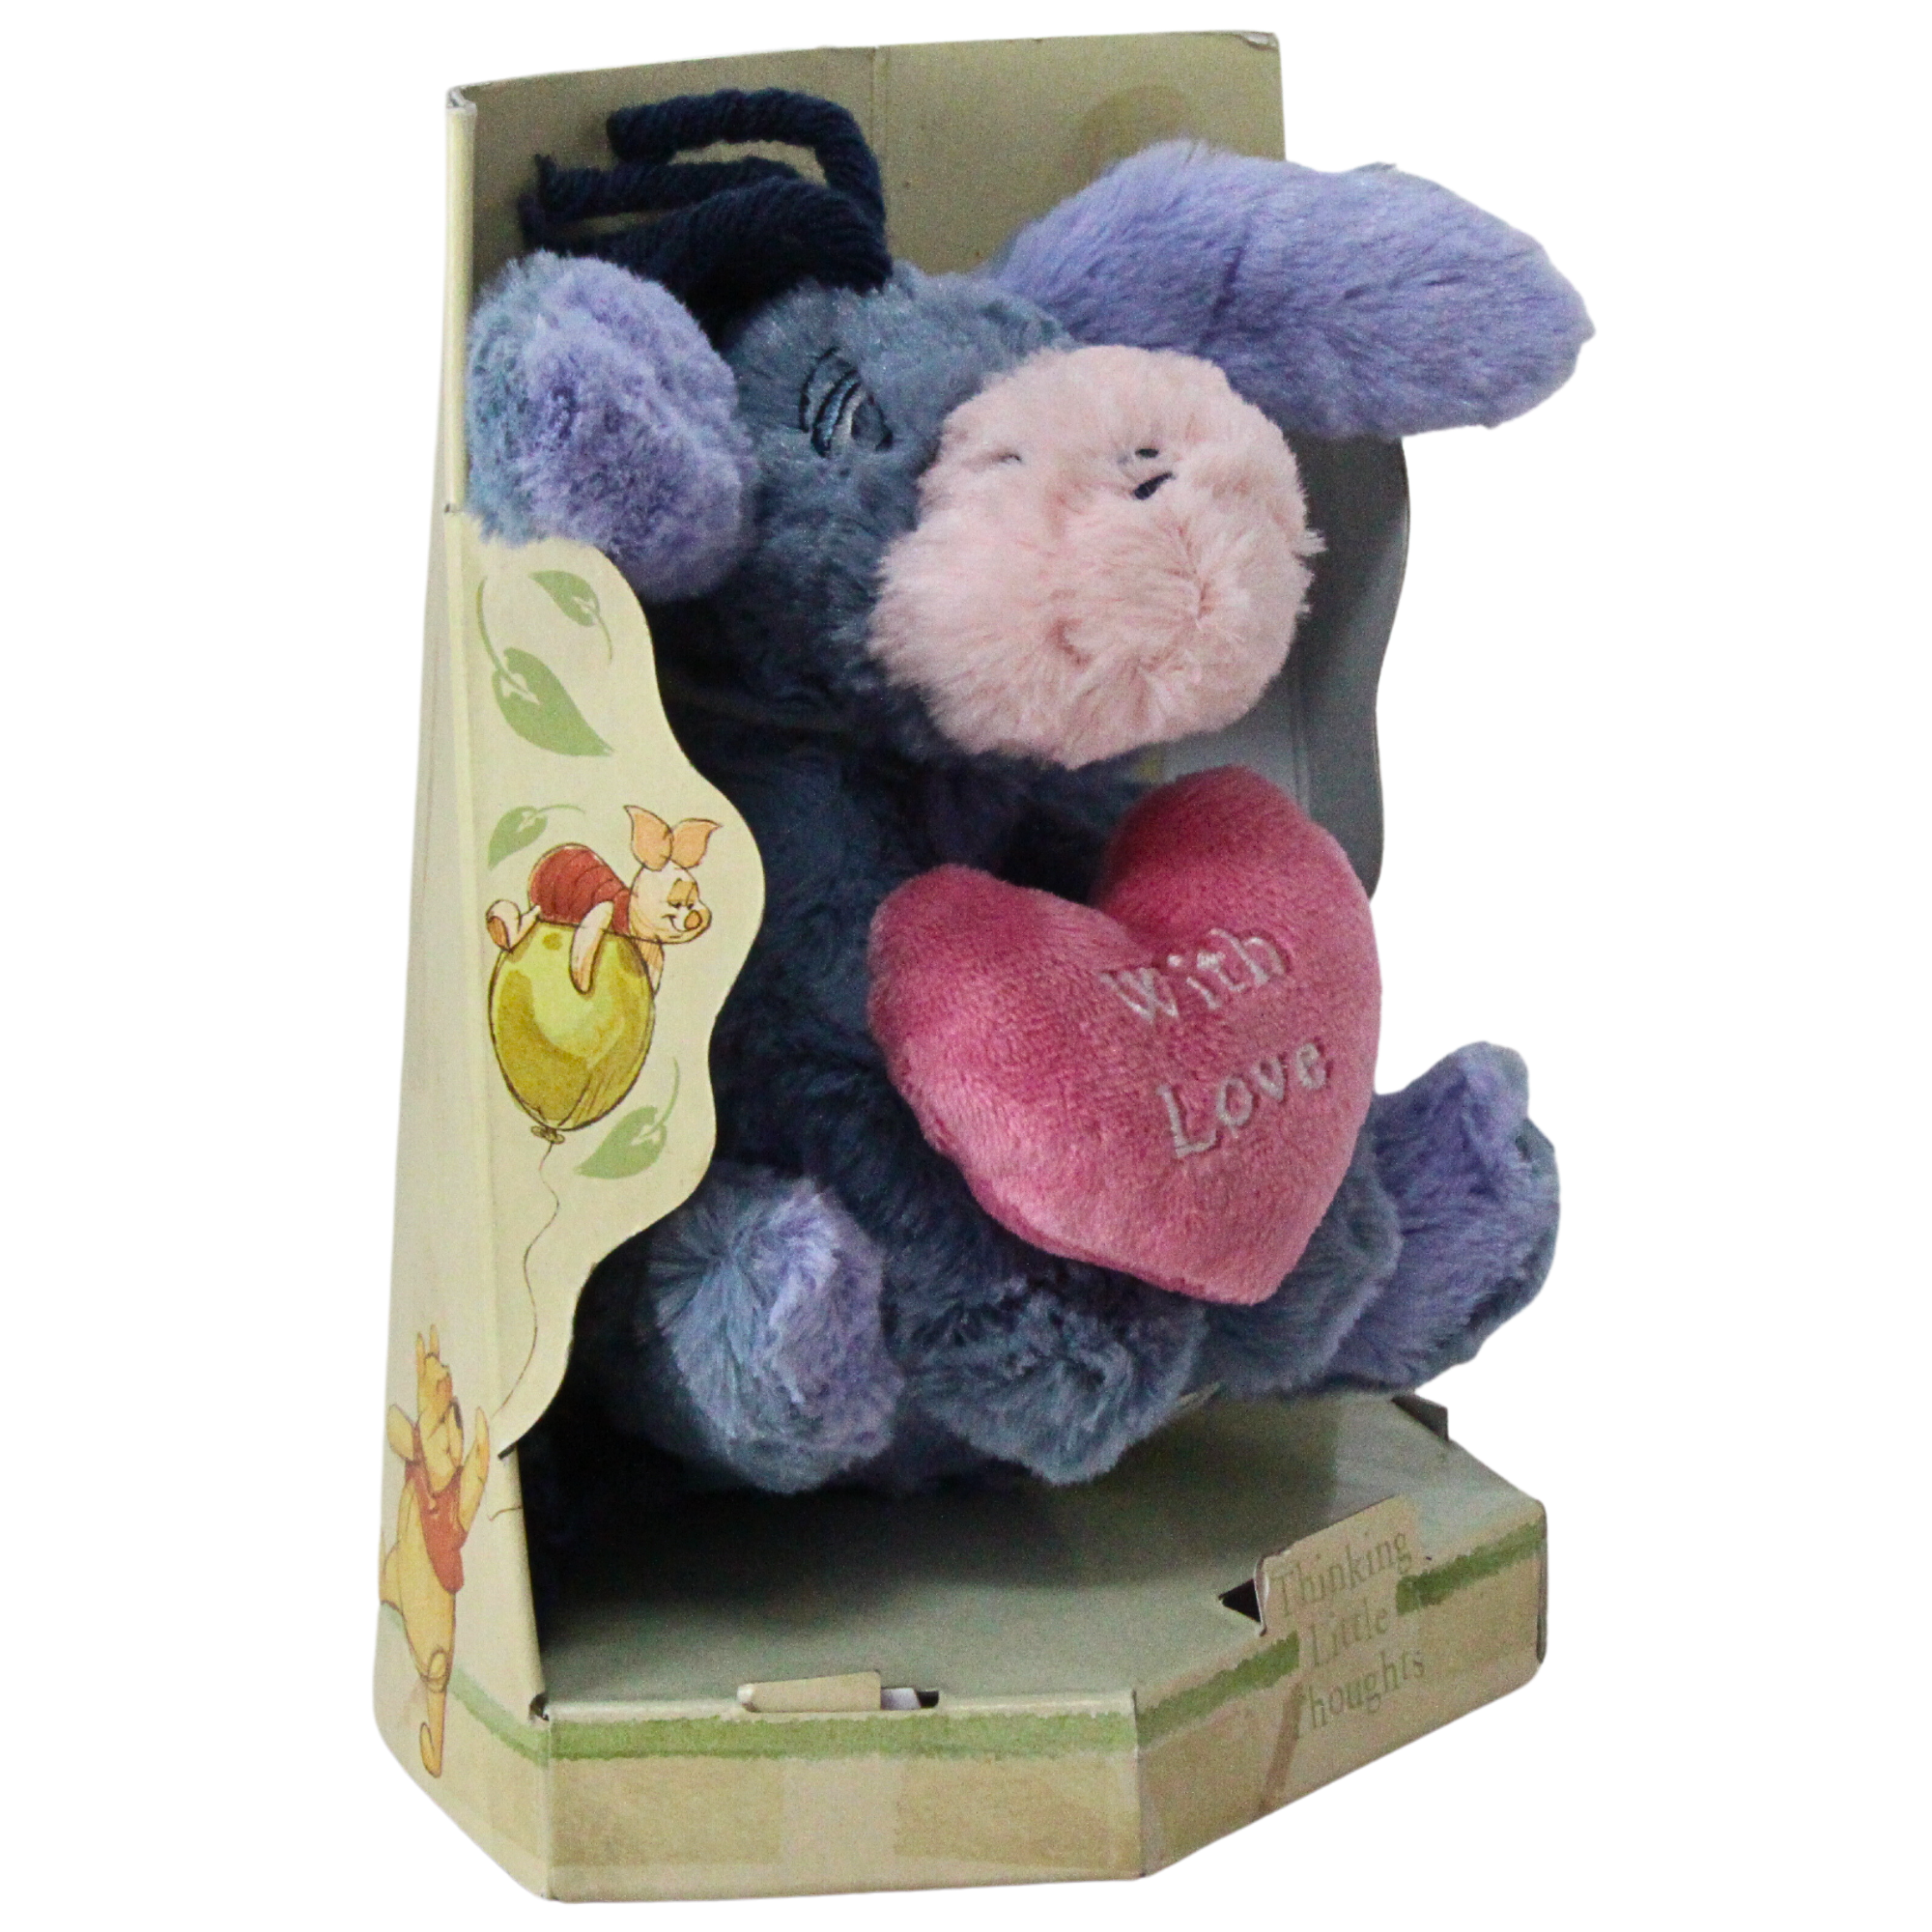 Disney - Eeyore 8" Soft Toy With Love Heart - Thinking Little Thoughts - Toptoys2u